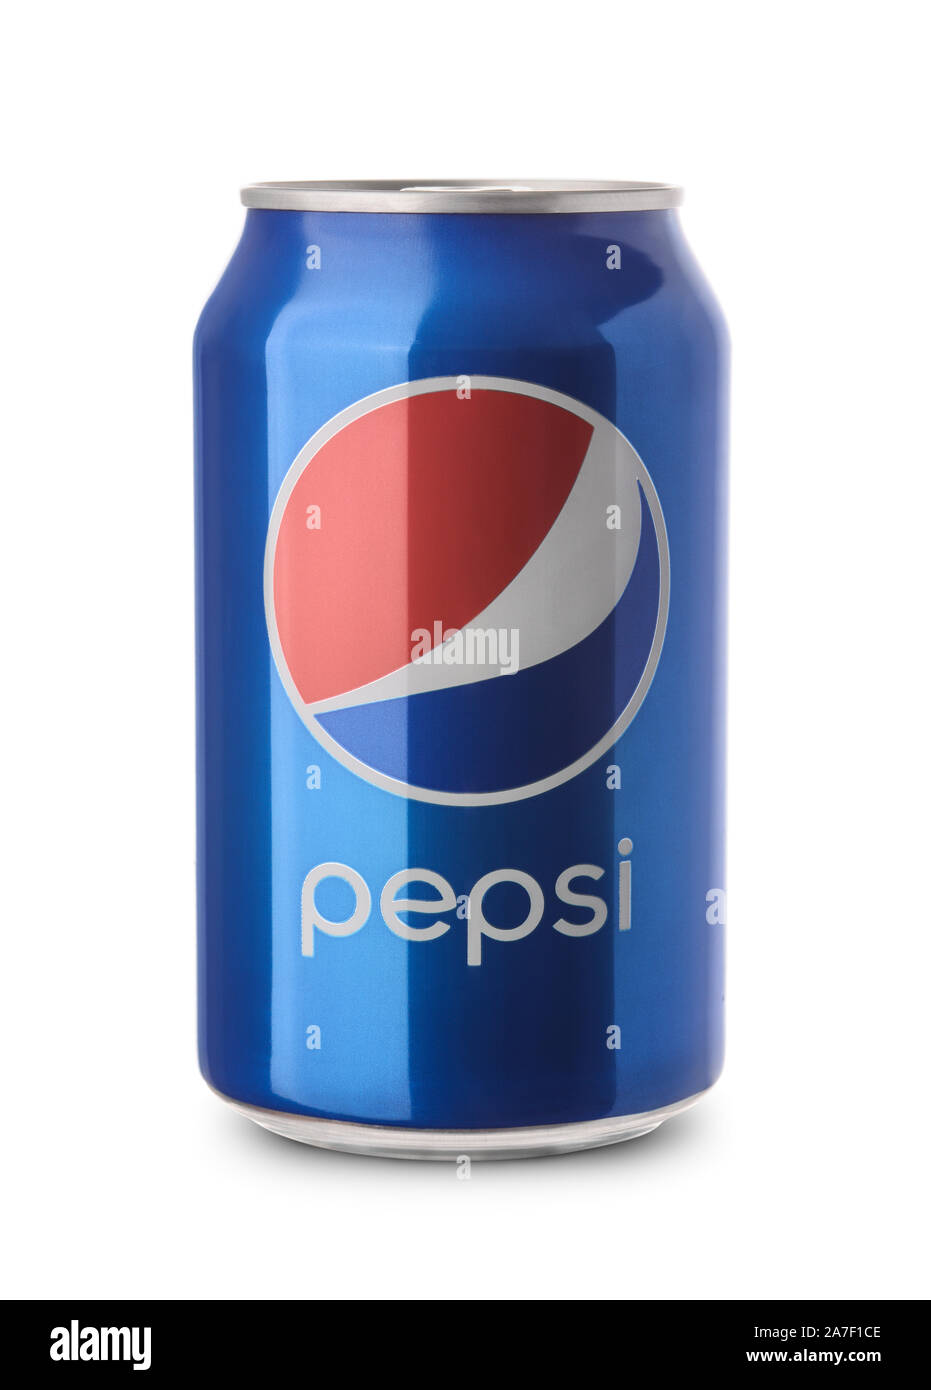 Samara, Russia - February 26, 2016: A product shot of an unopened  can of Pepsi isolated on white background. Pepsi is manufactured by Pepsico Inc. Stock Photo